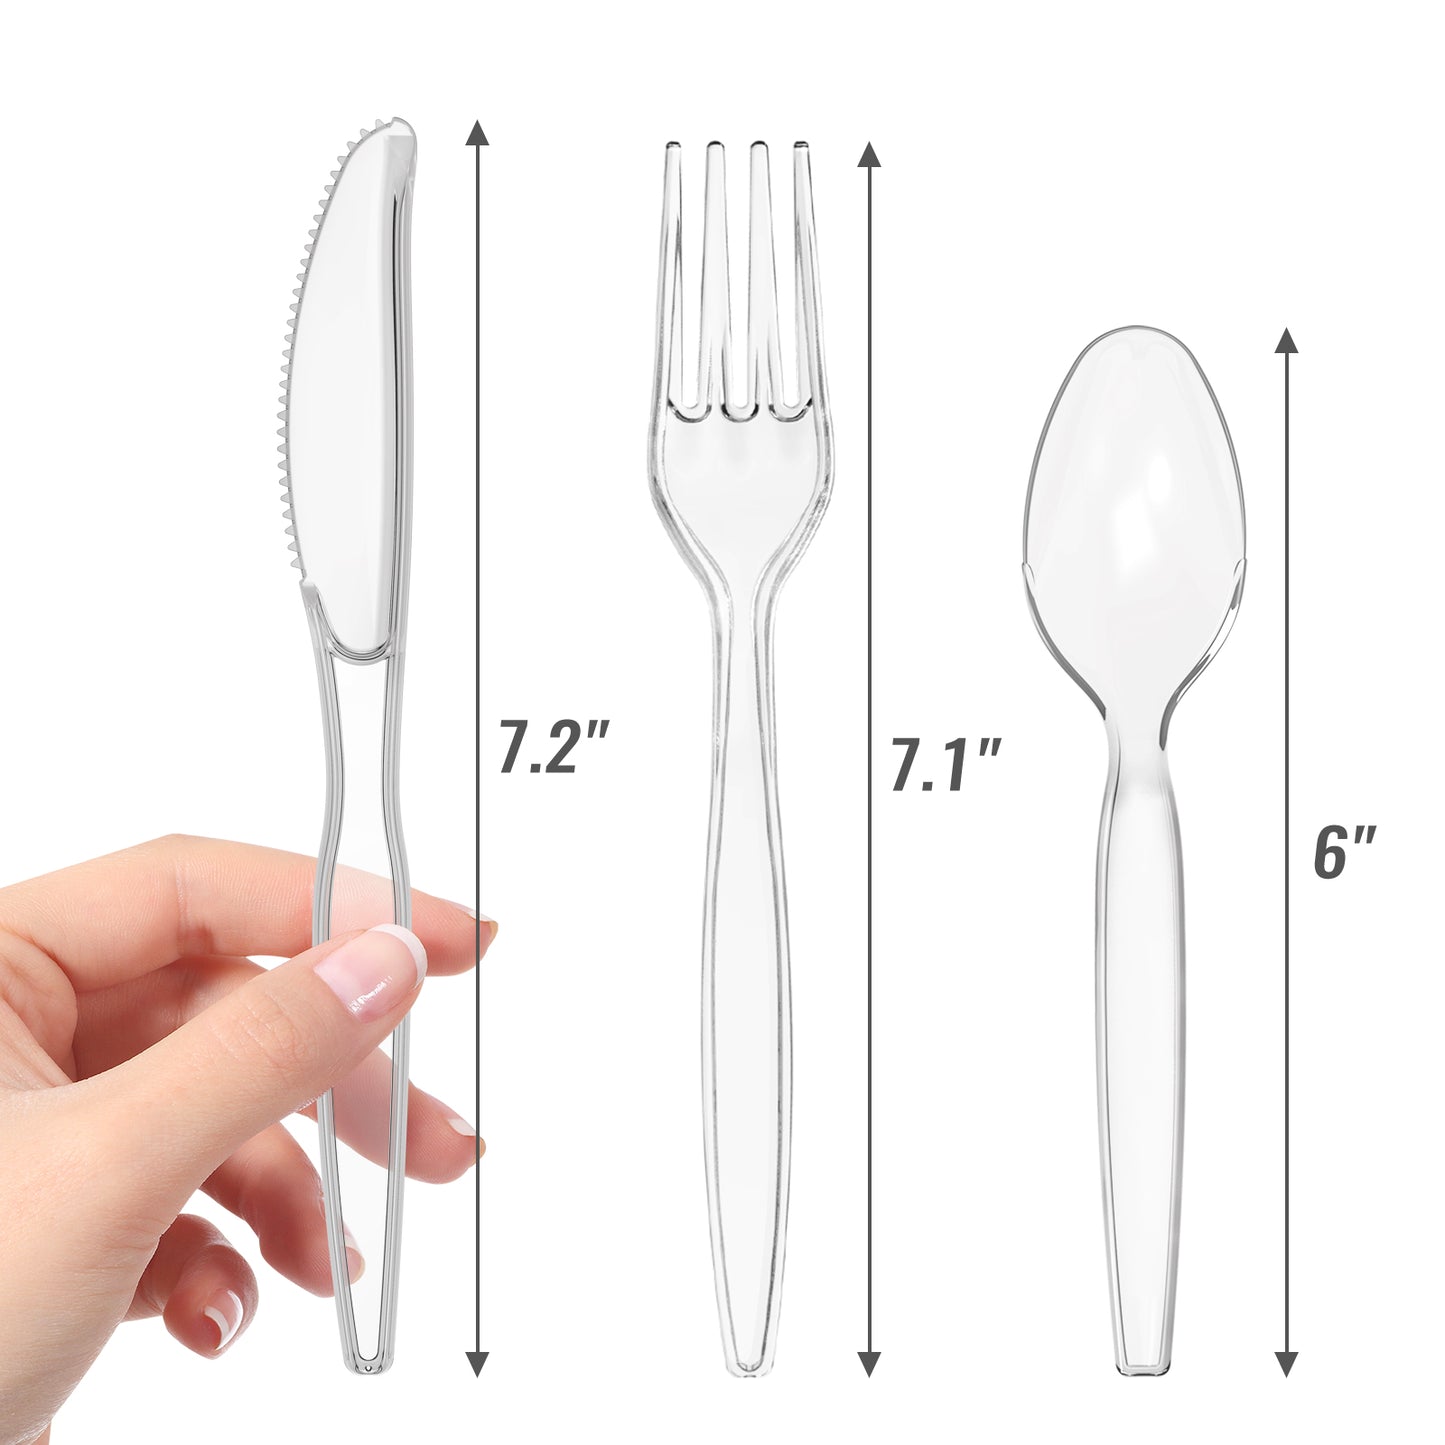 PSTVITA Heavy Duty Plastic Cutlery Set - Disposable 30 Forks 30 Spoons 30 Knives, Clear, Pack of 90